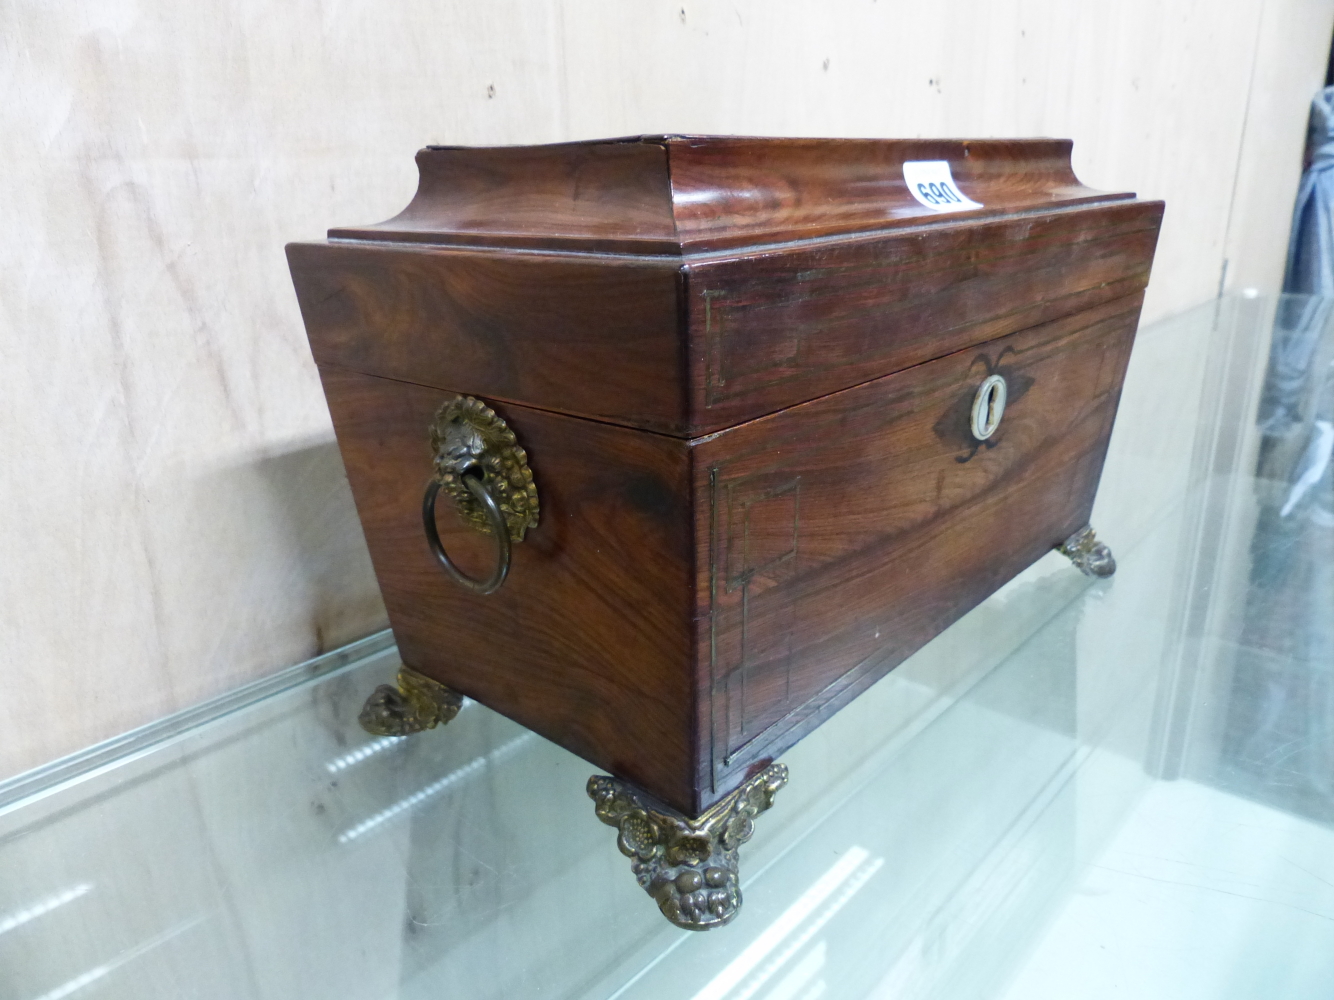 A REGENCY ROSEWOOD AND BRASS INLAID SARCOPHAGUS FORM TEA CADDY WITH BRASS RING HANDLES AND FEET. W. - Image 5 of 7